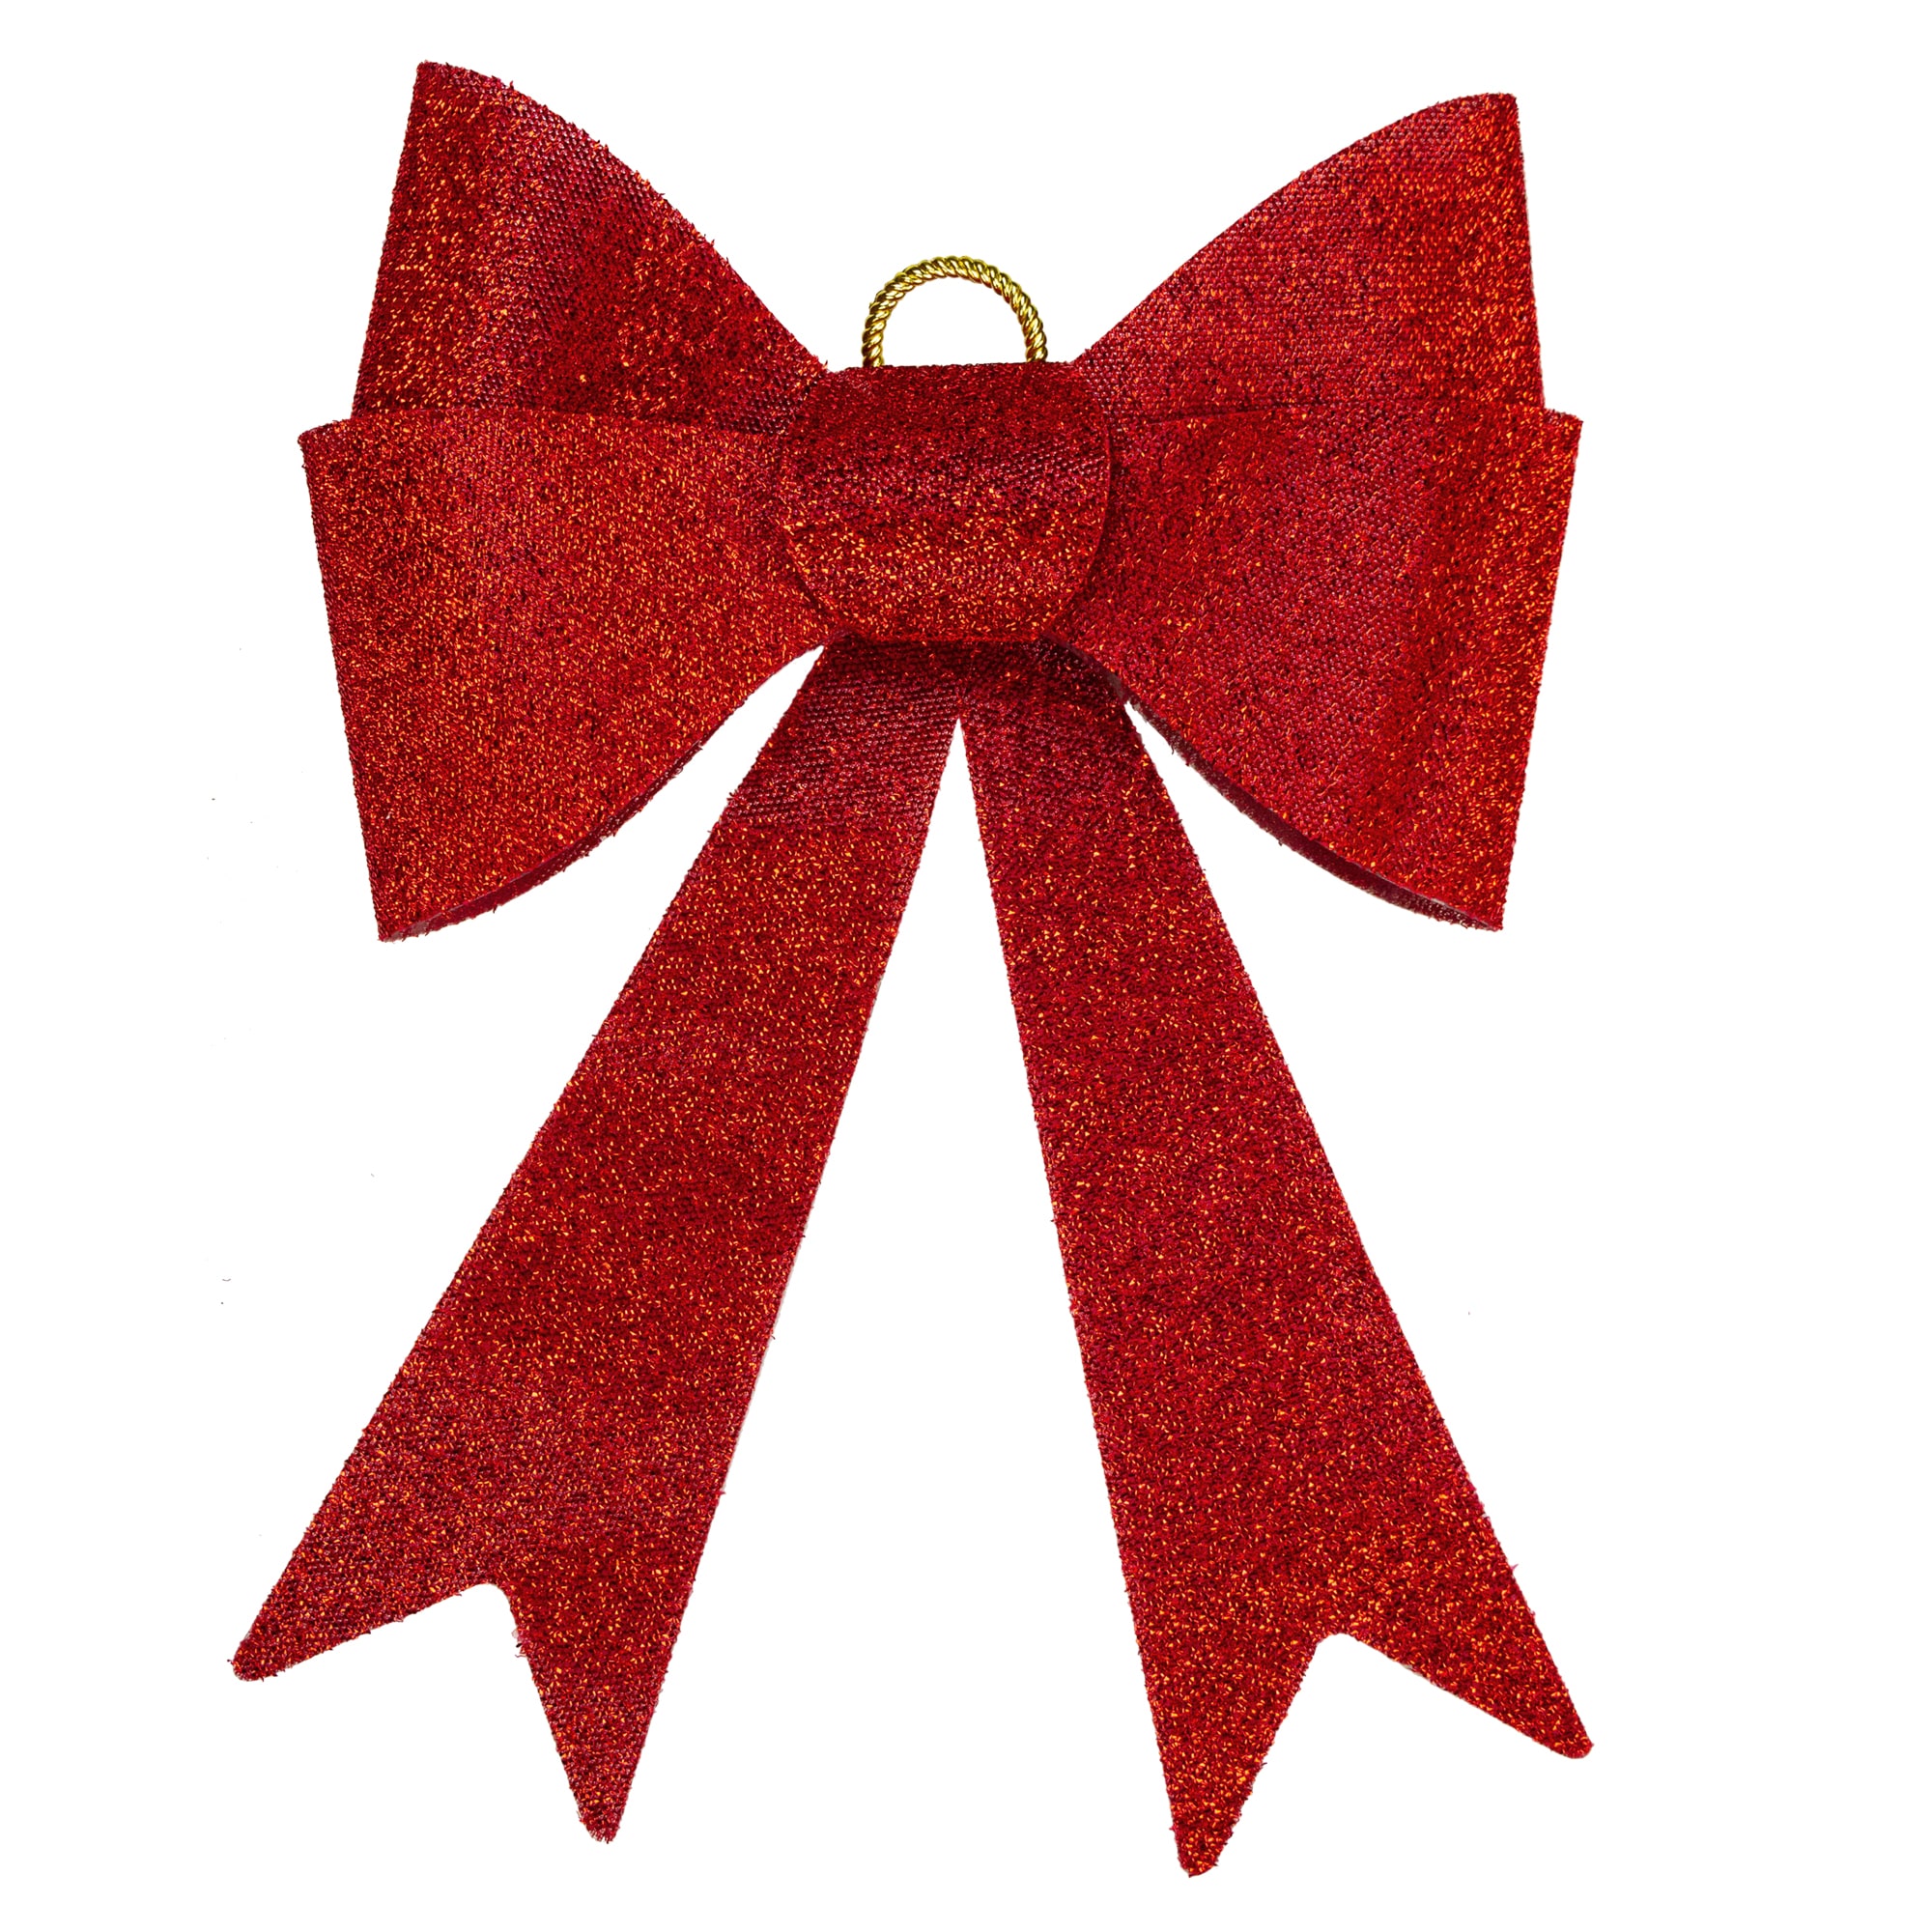 Red Decorative Bows & Ribbon at Lowes.com